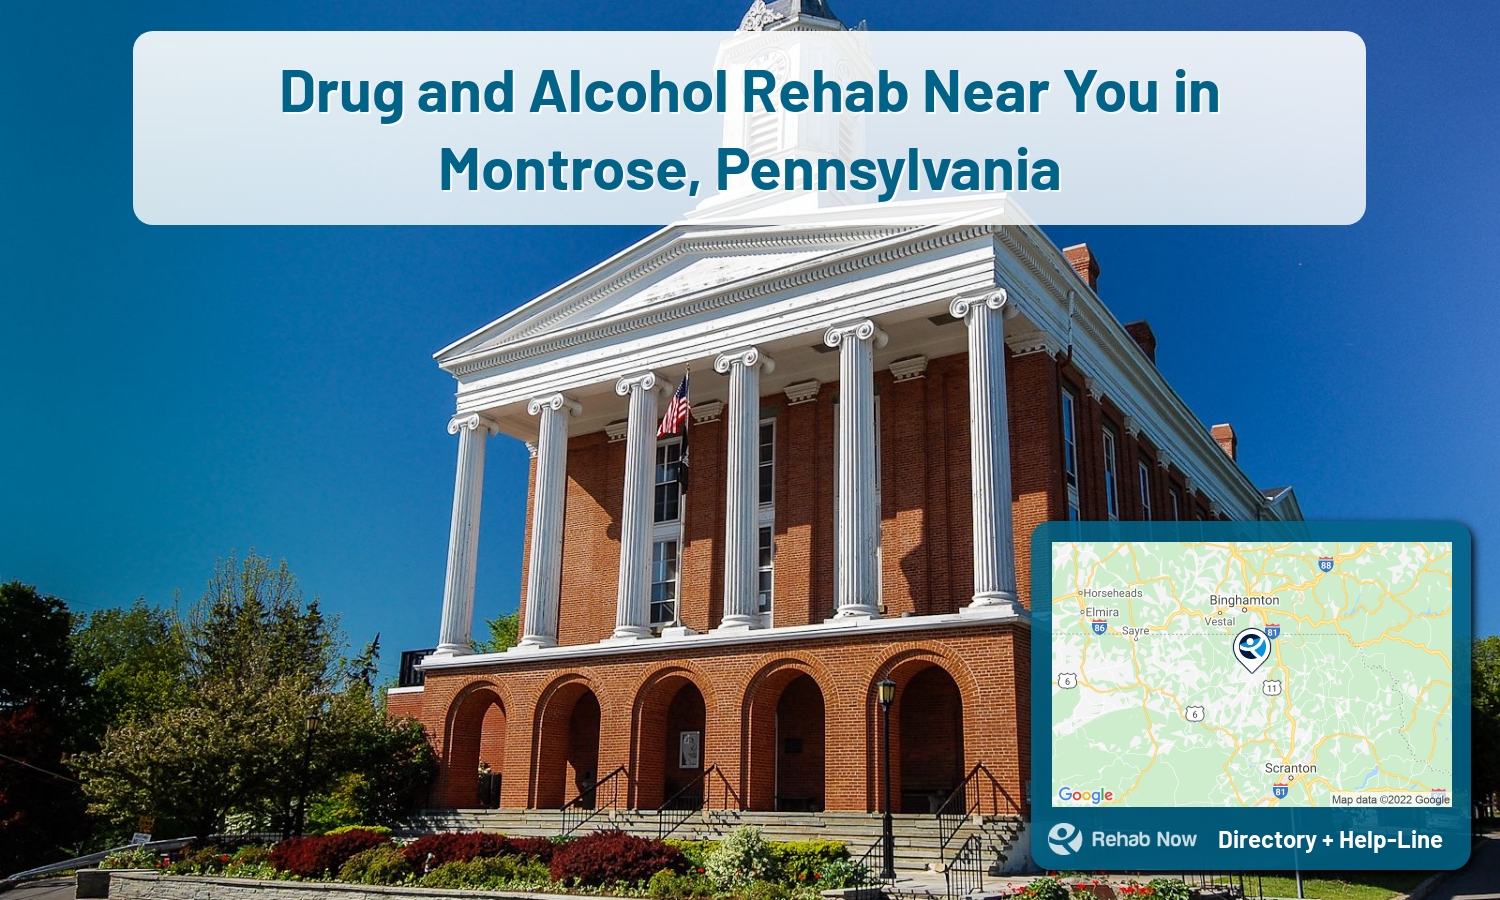 Montrose, PA Treatment Centers. Find drug rehab in Montrose, Pennsylvania, or detox and treatment programs. Get the right help now!